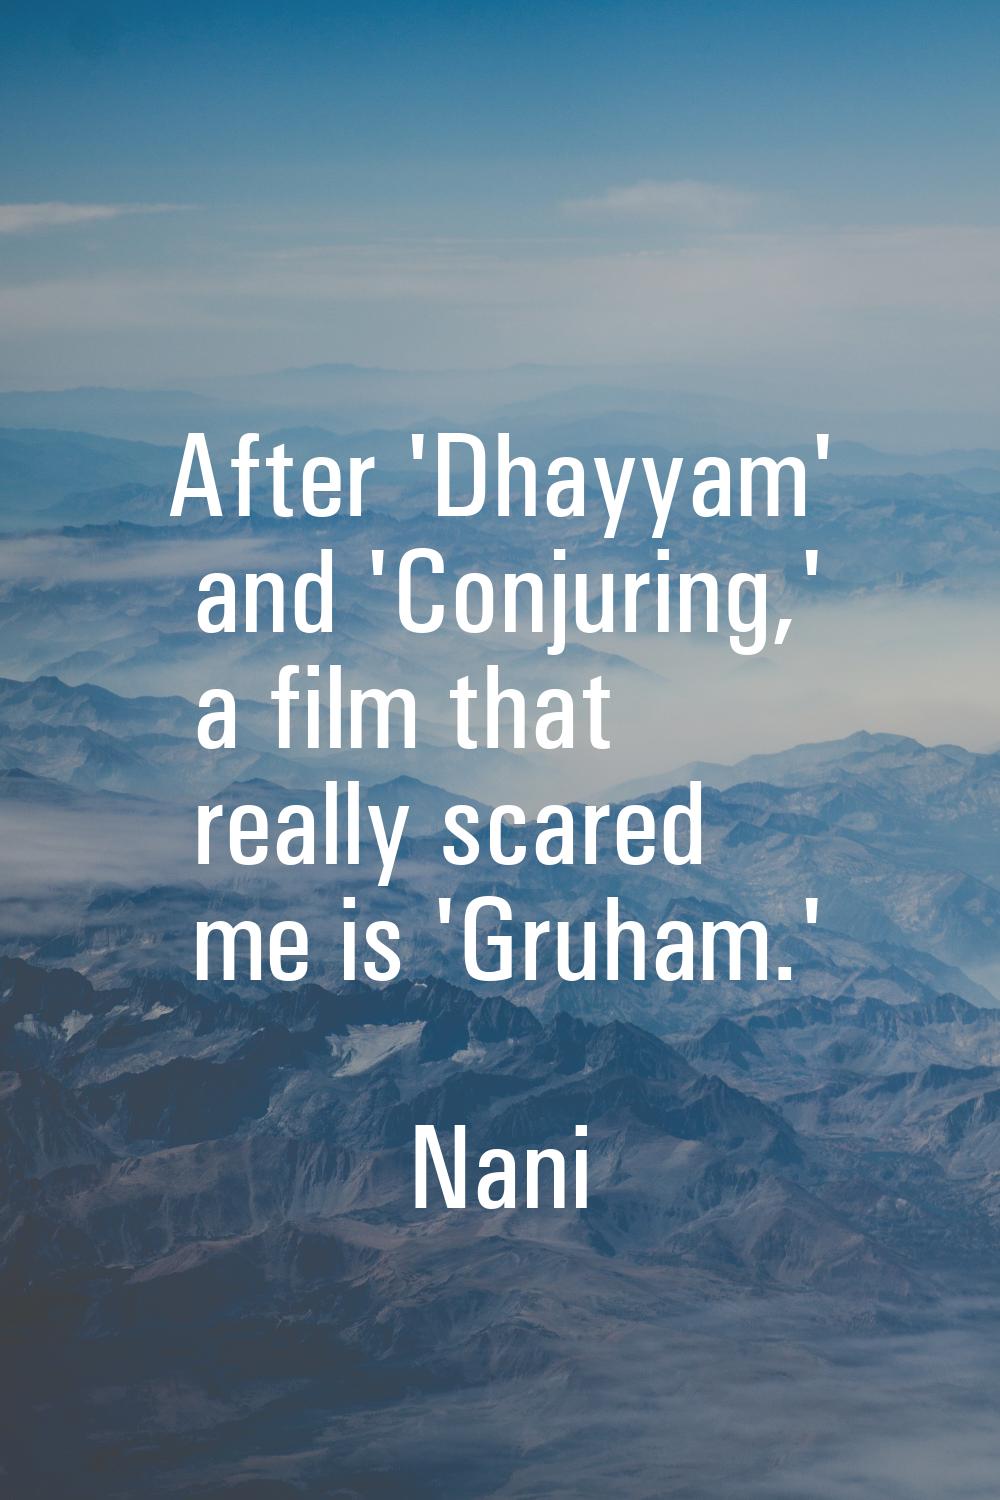 After 'Dhayyam' and 'Conjuring,' a film that really scared me is 'Gruham.'